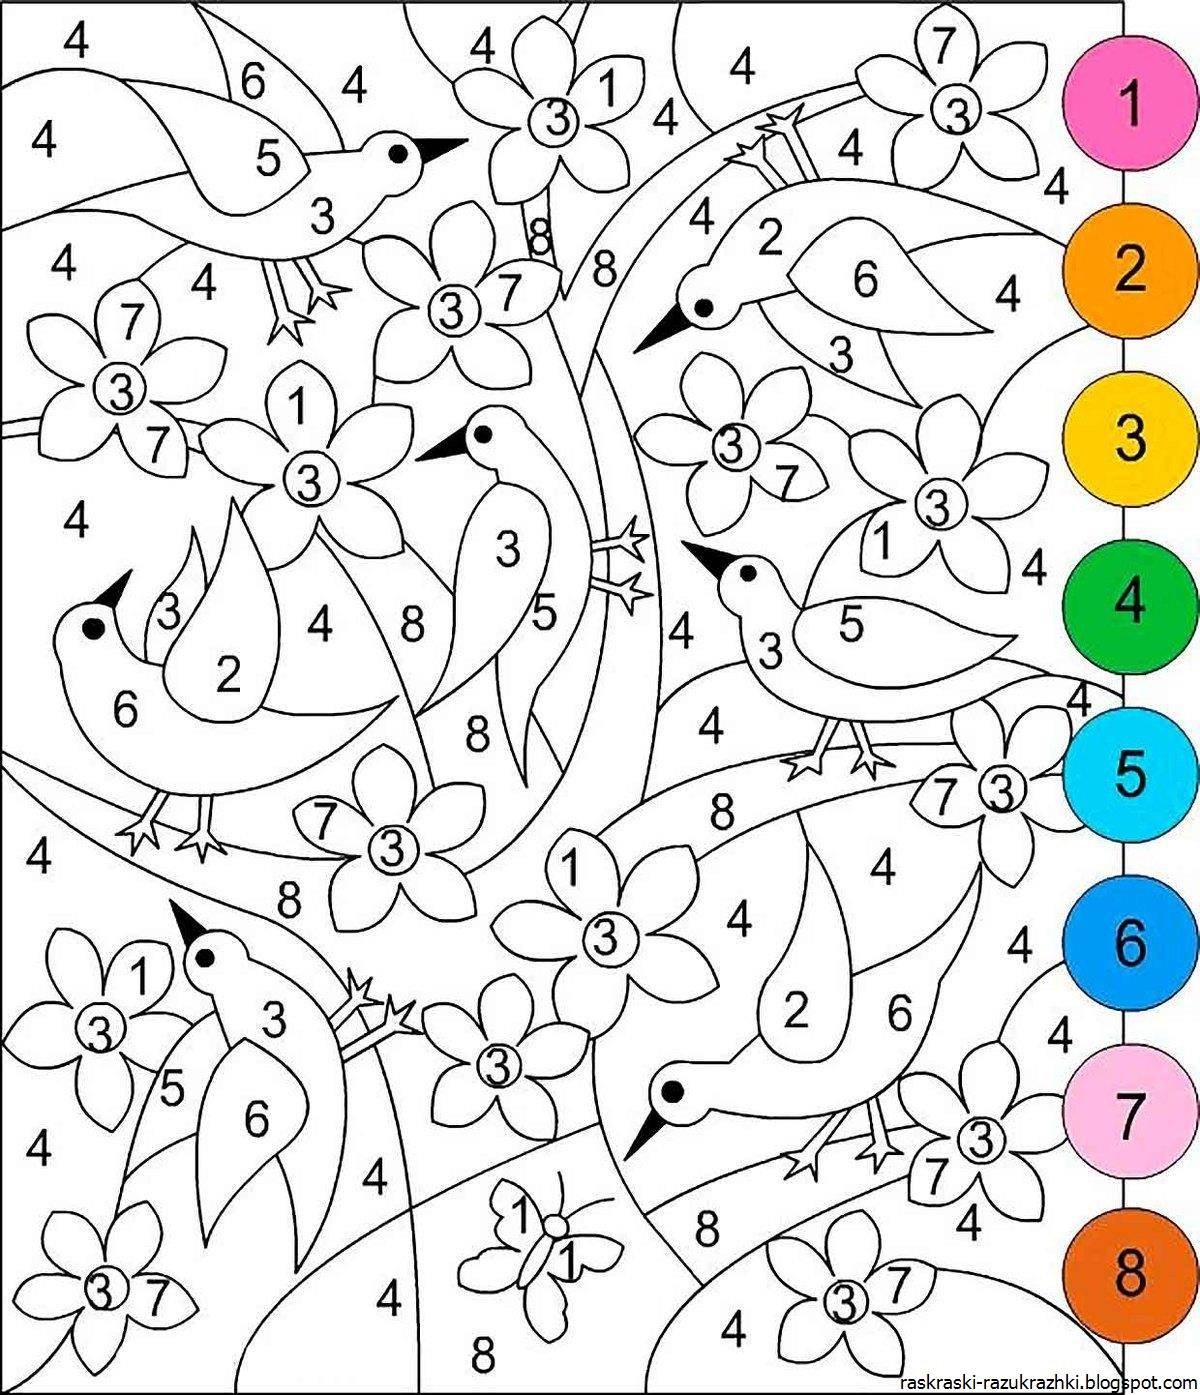 Creative coloring book for 8 year olds